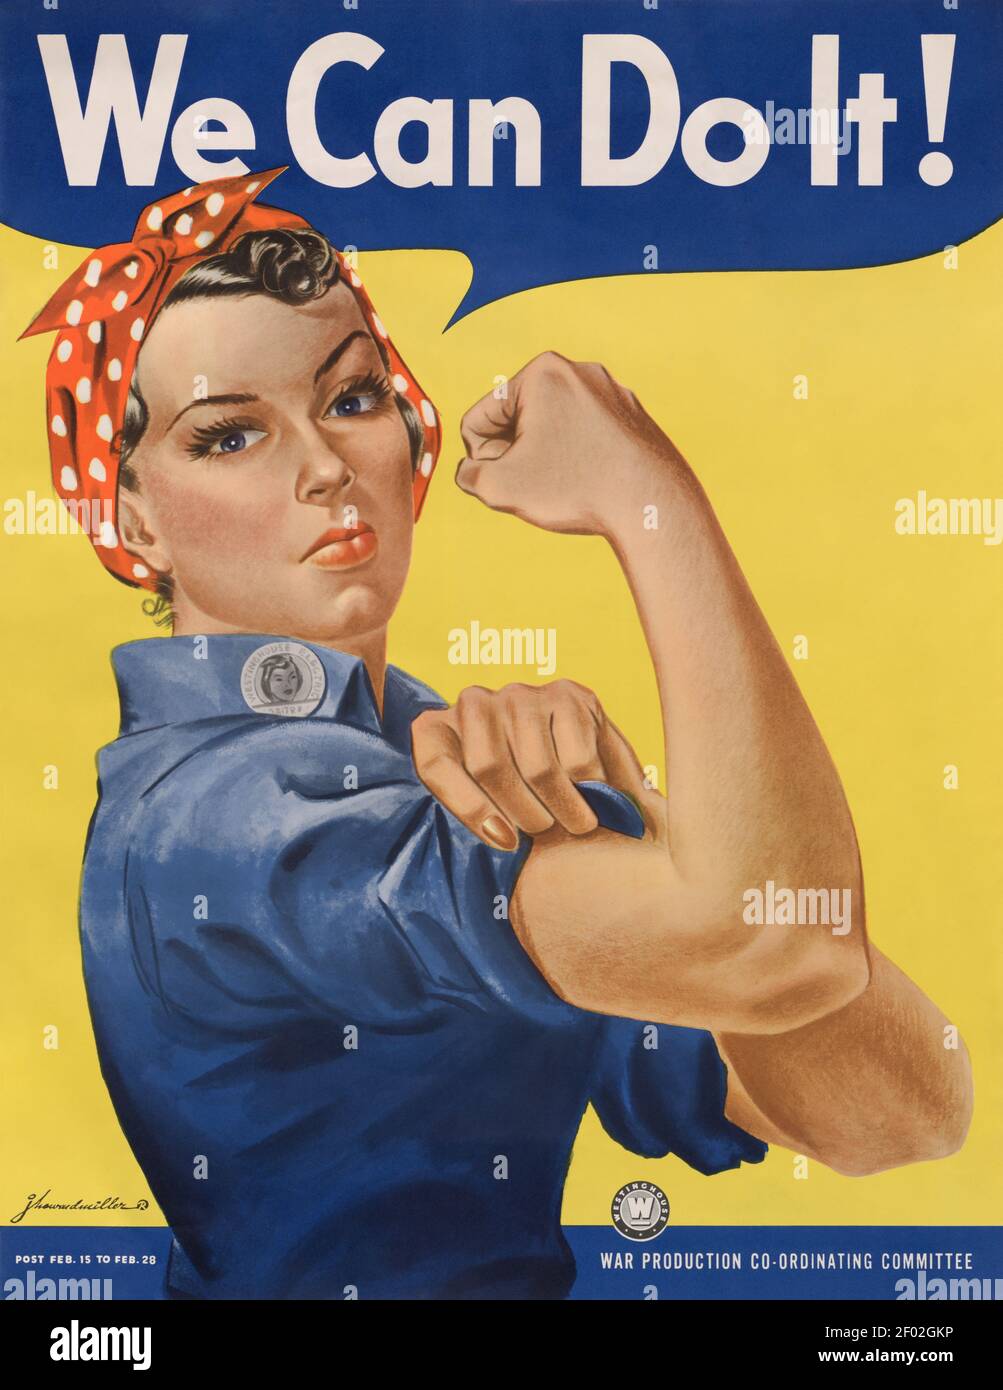 'We Can Do It!' is an American World War II wartime poster produced by J. Howard Miller in 1943 for Westinghouse Electric as an inspiration. Stock Photo